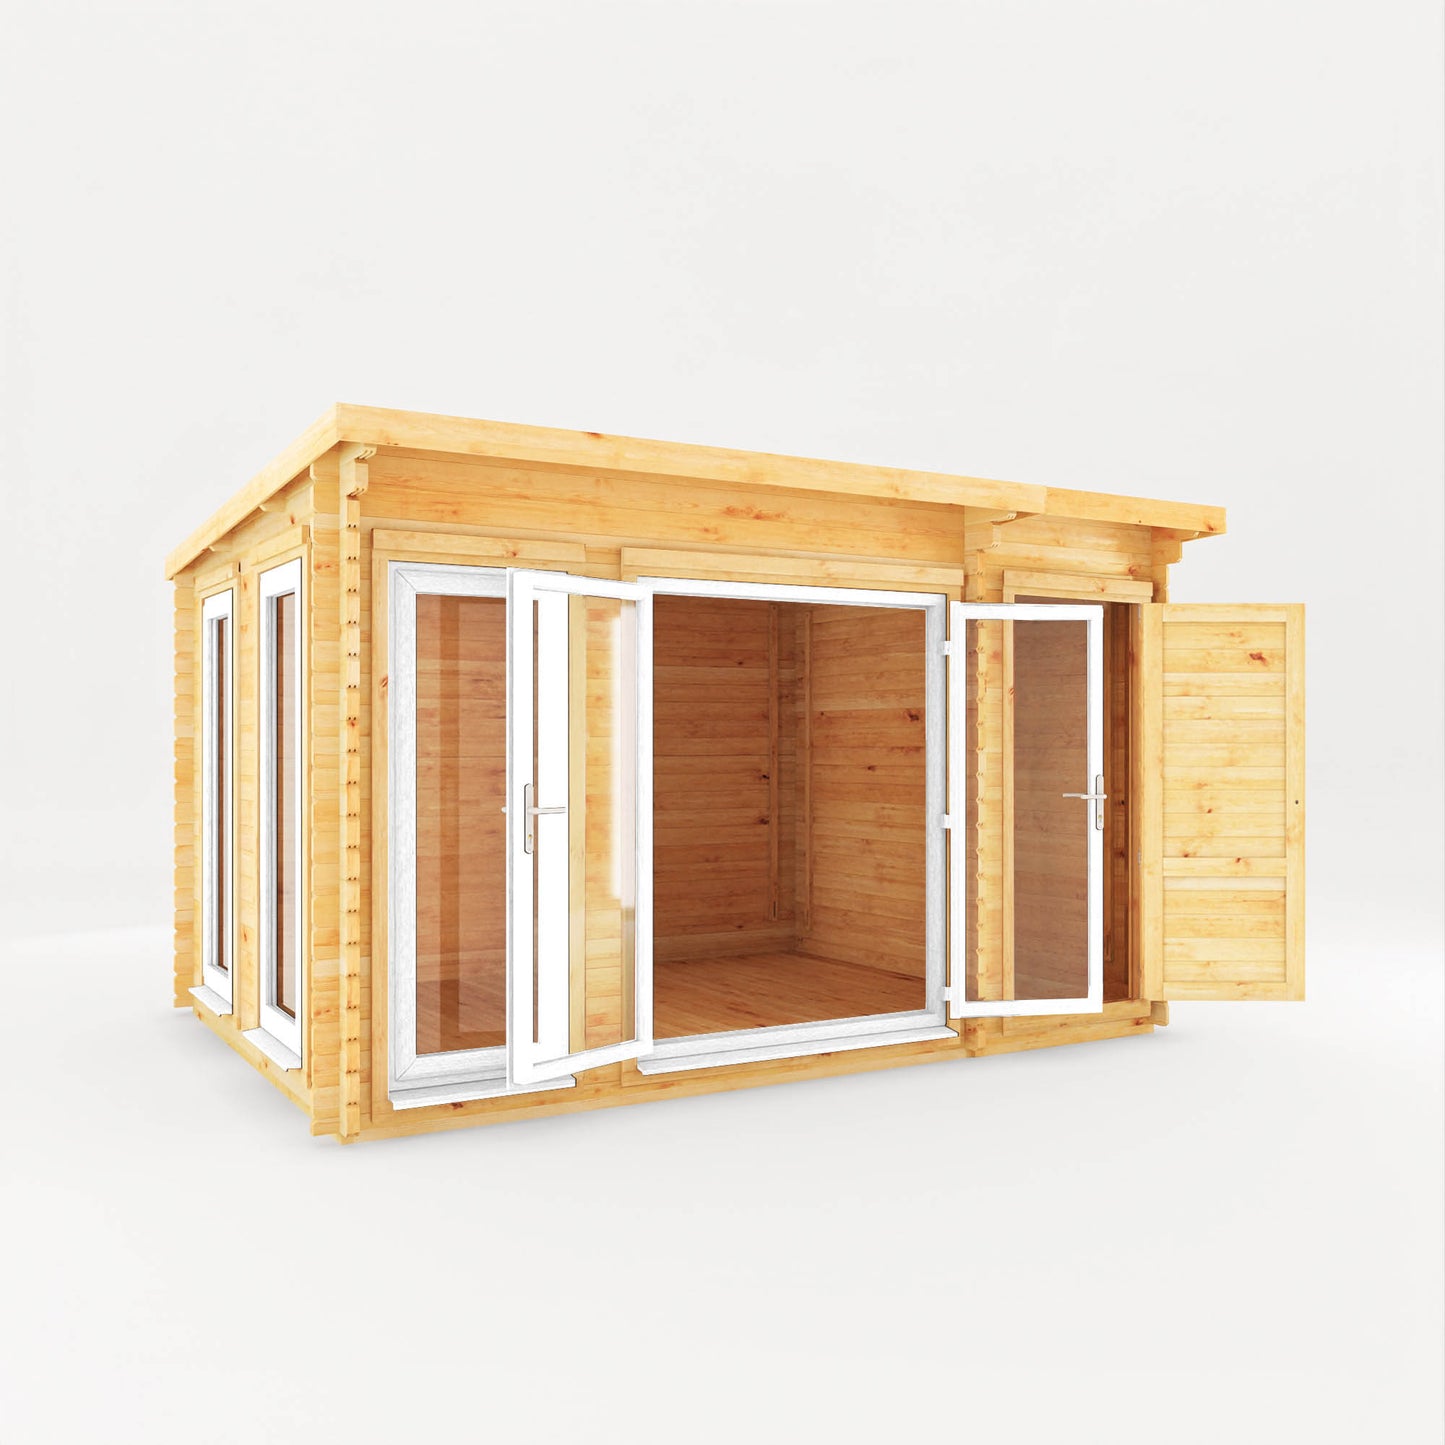 The 4.1m x 3m Wren Pent Log Cabin with Side Shed and White UPVC